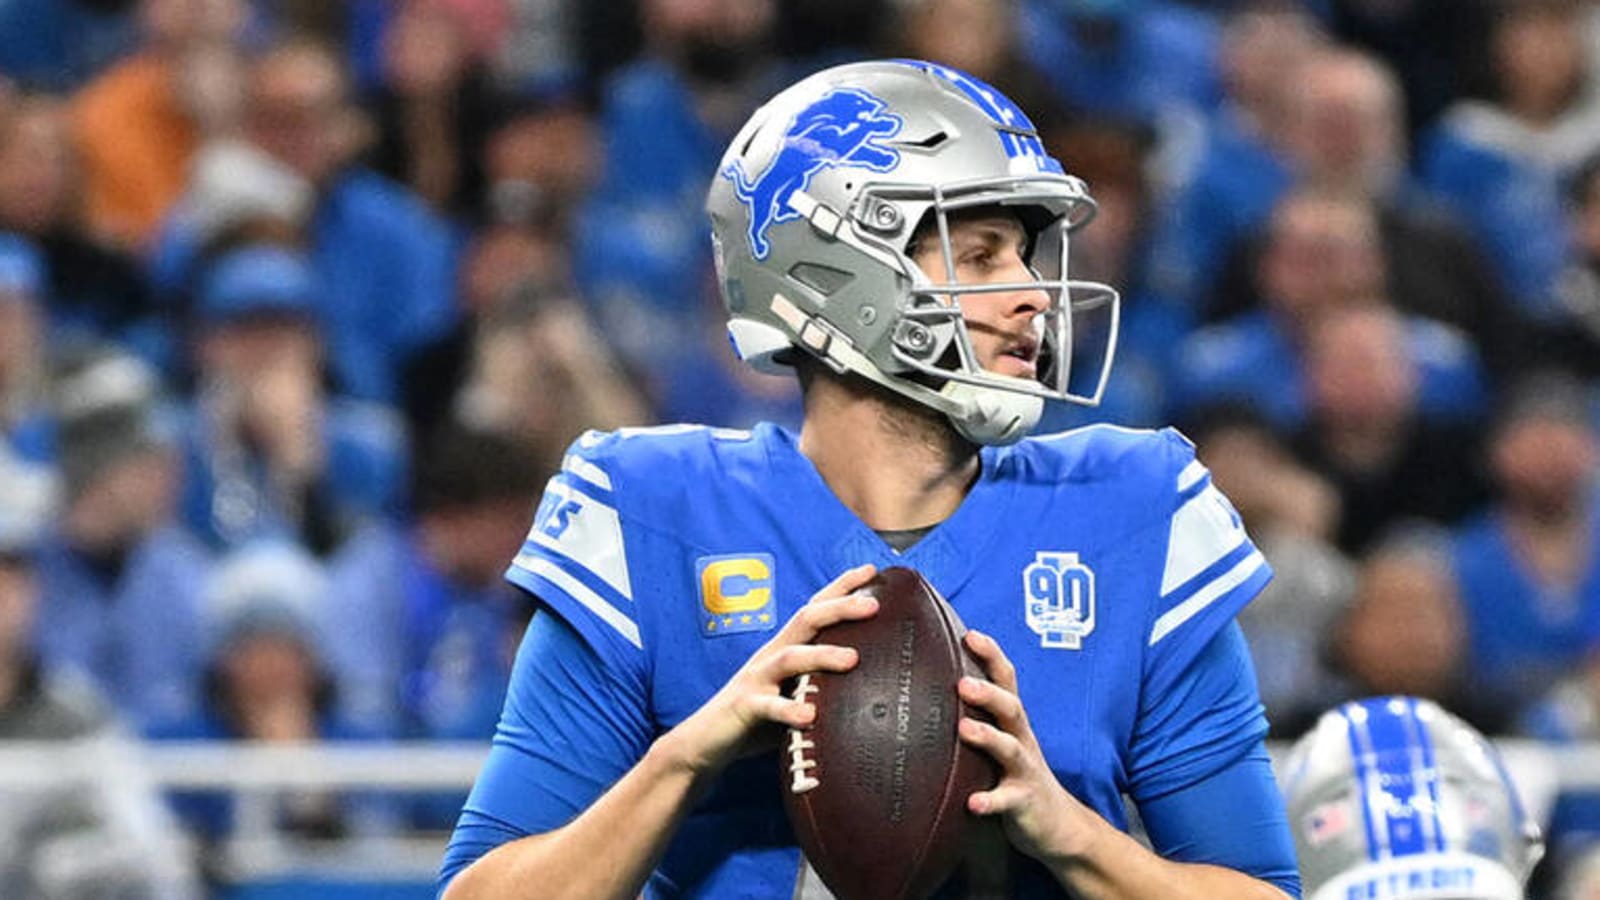 Watch: Jared Goff throws TD, Lions take early lead